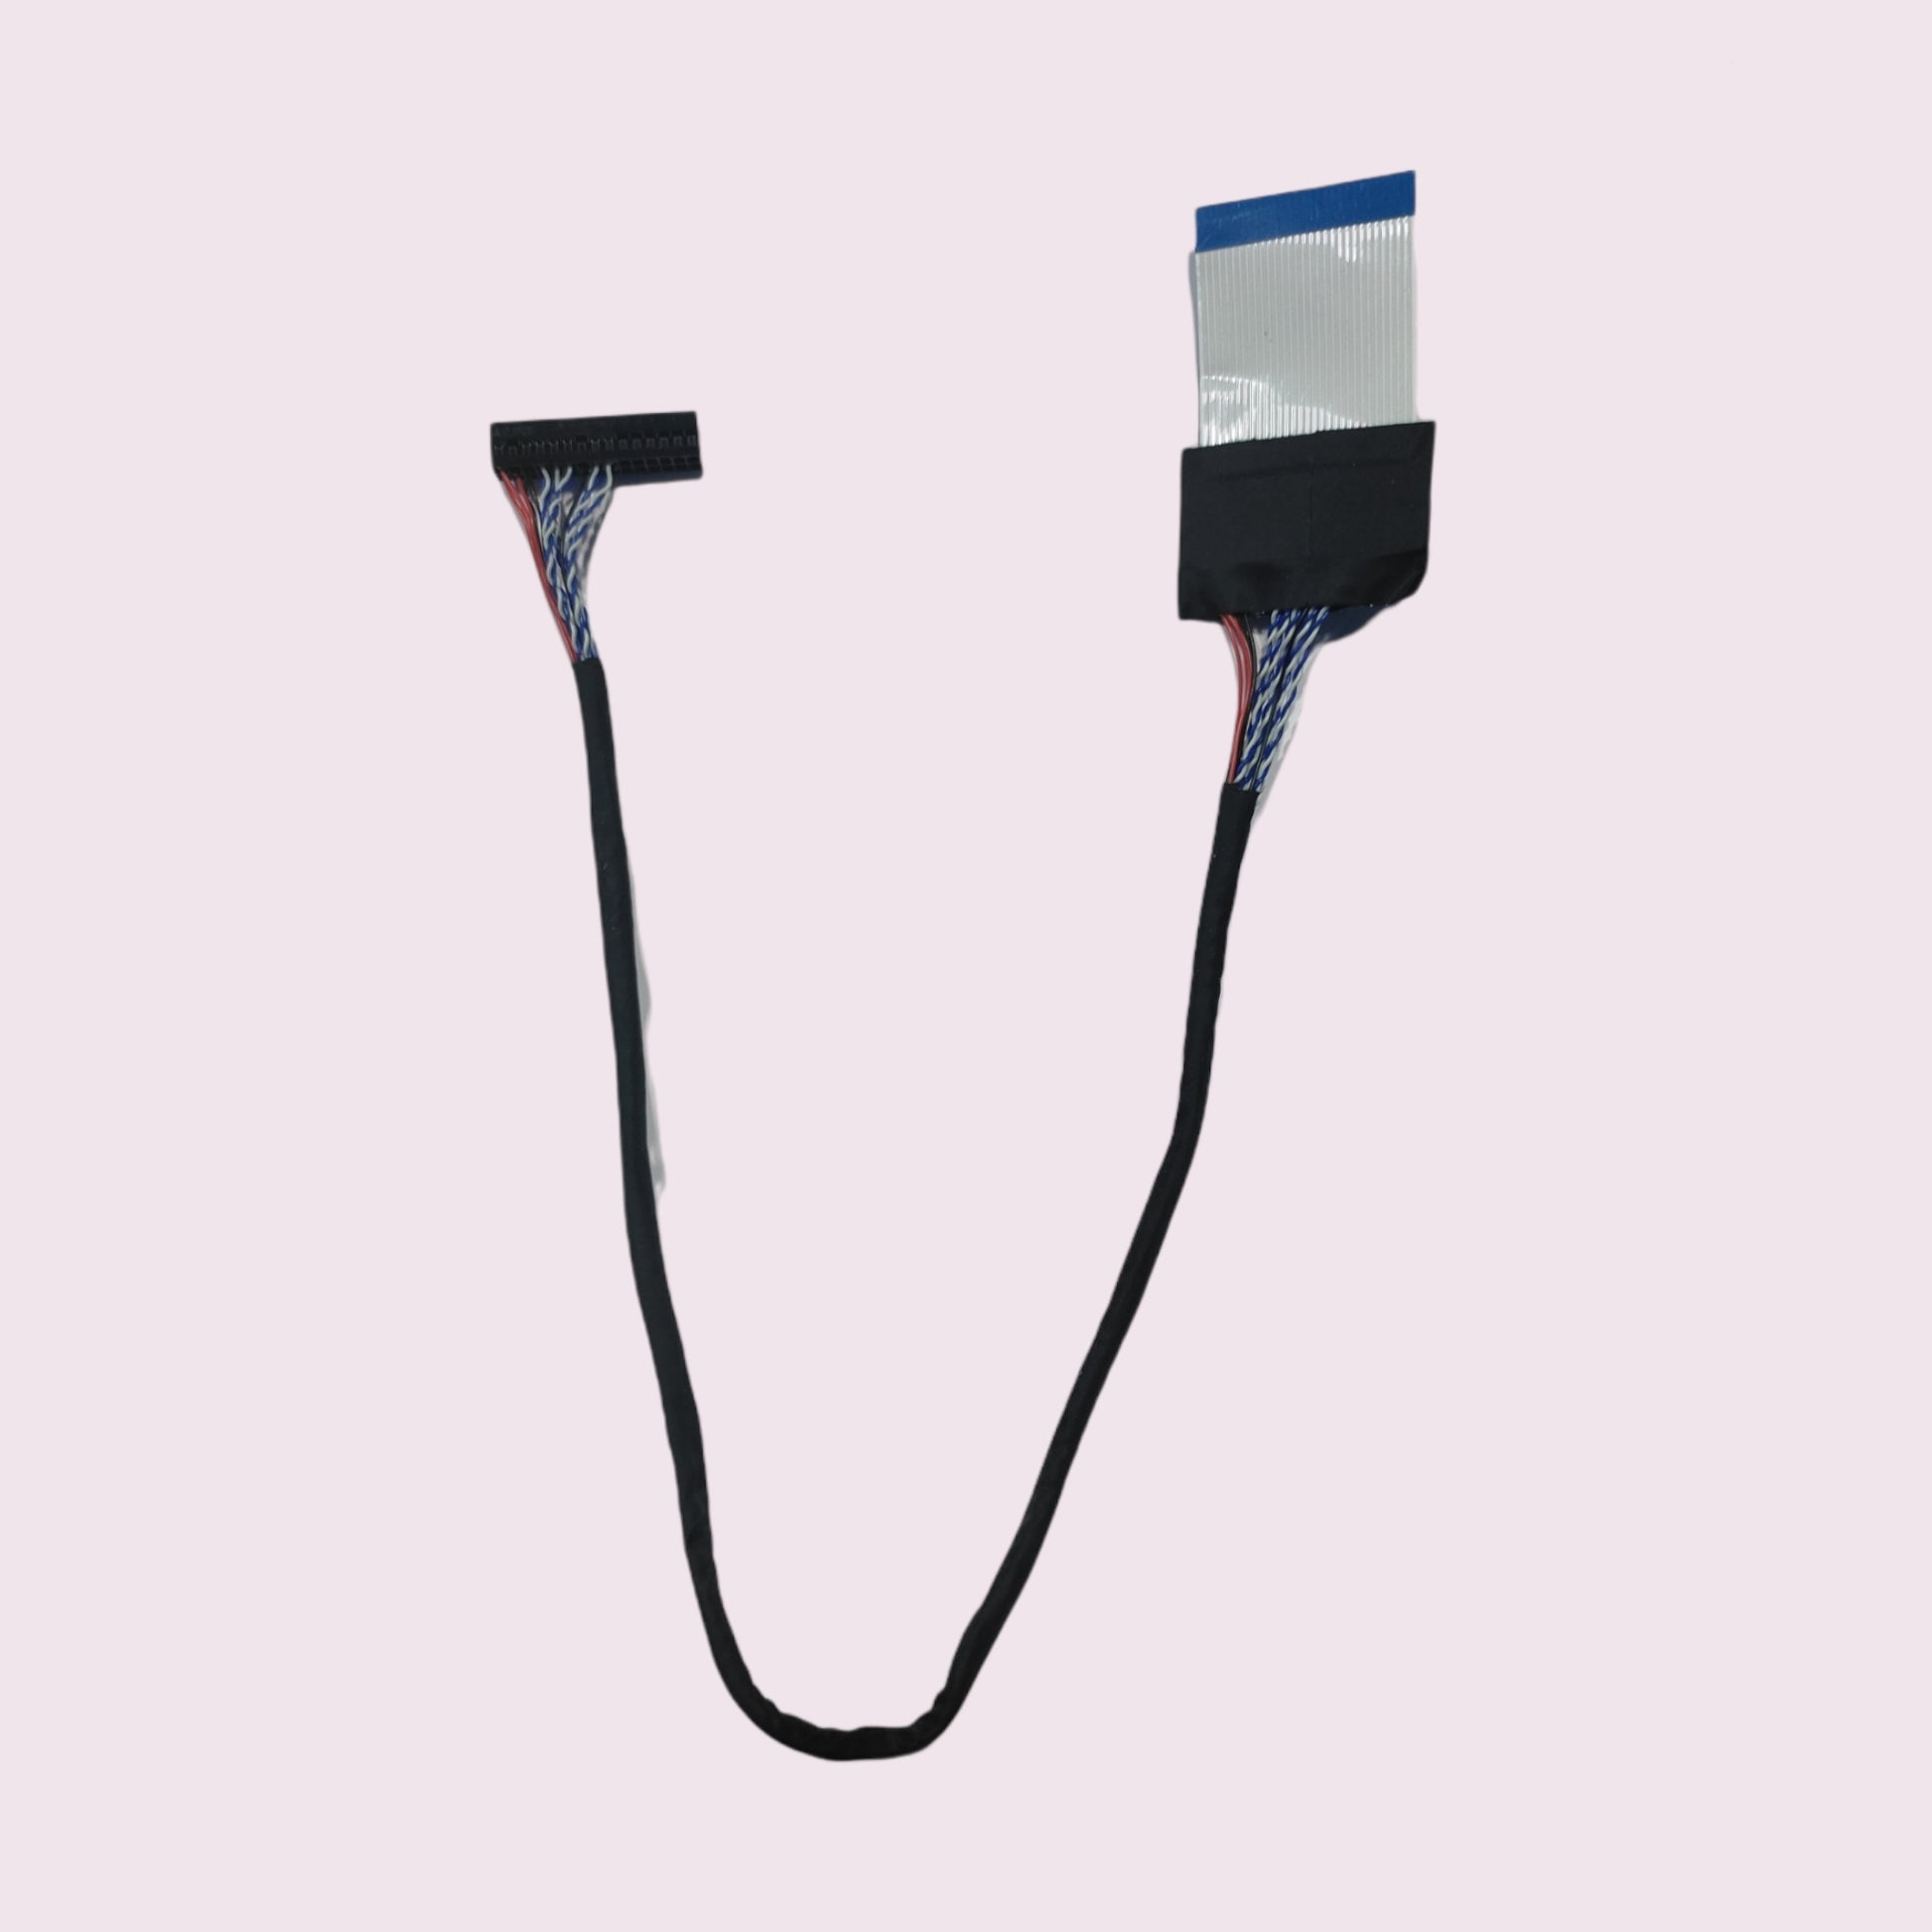 LVDS Cable 08 - Faritha